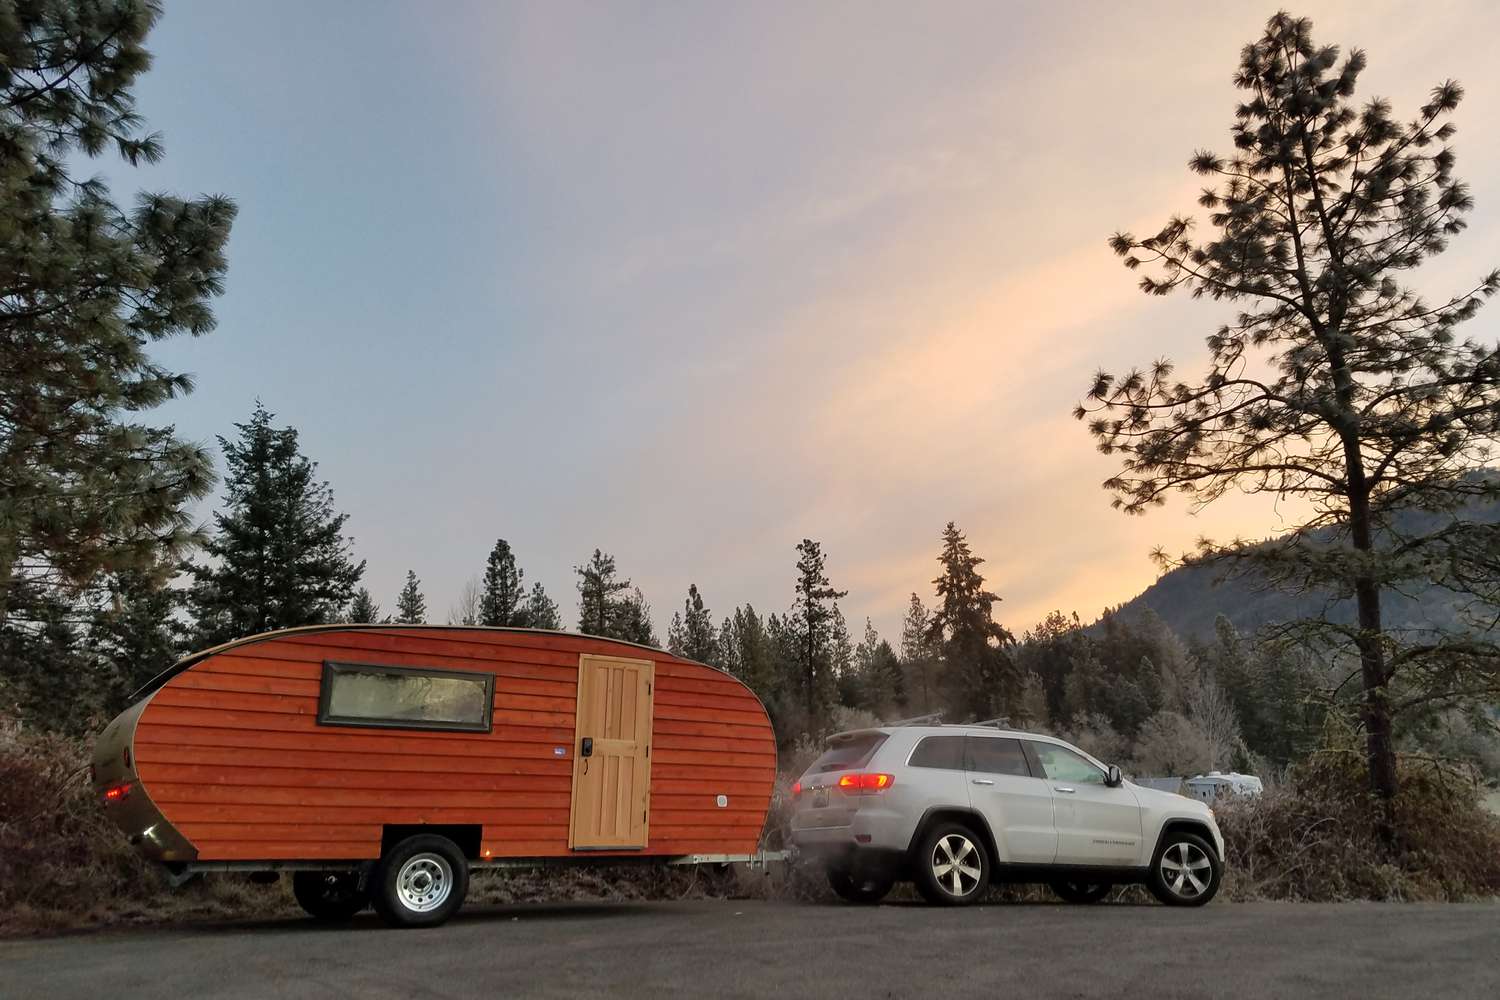 A Timberline camper trailer attached to an SUV